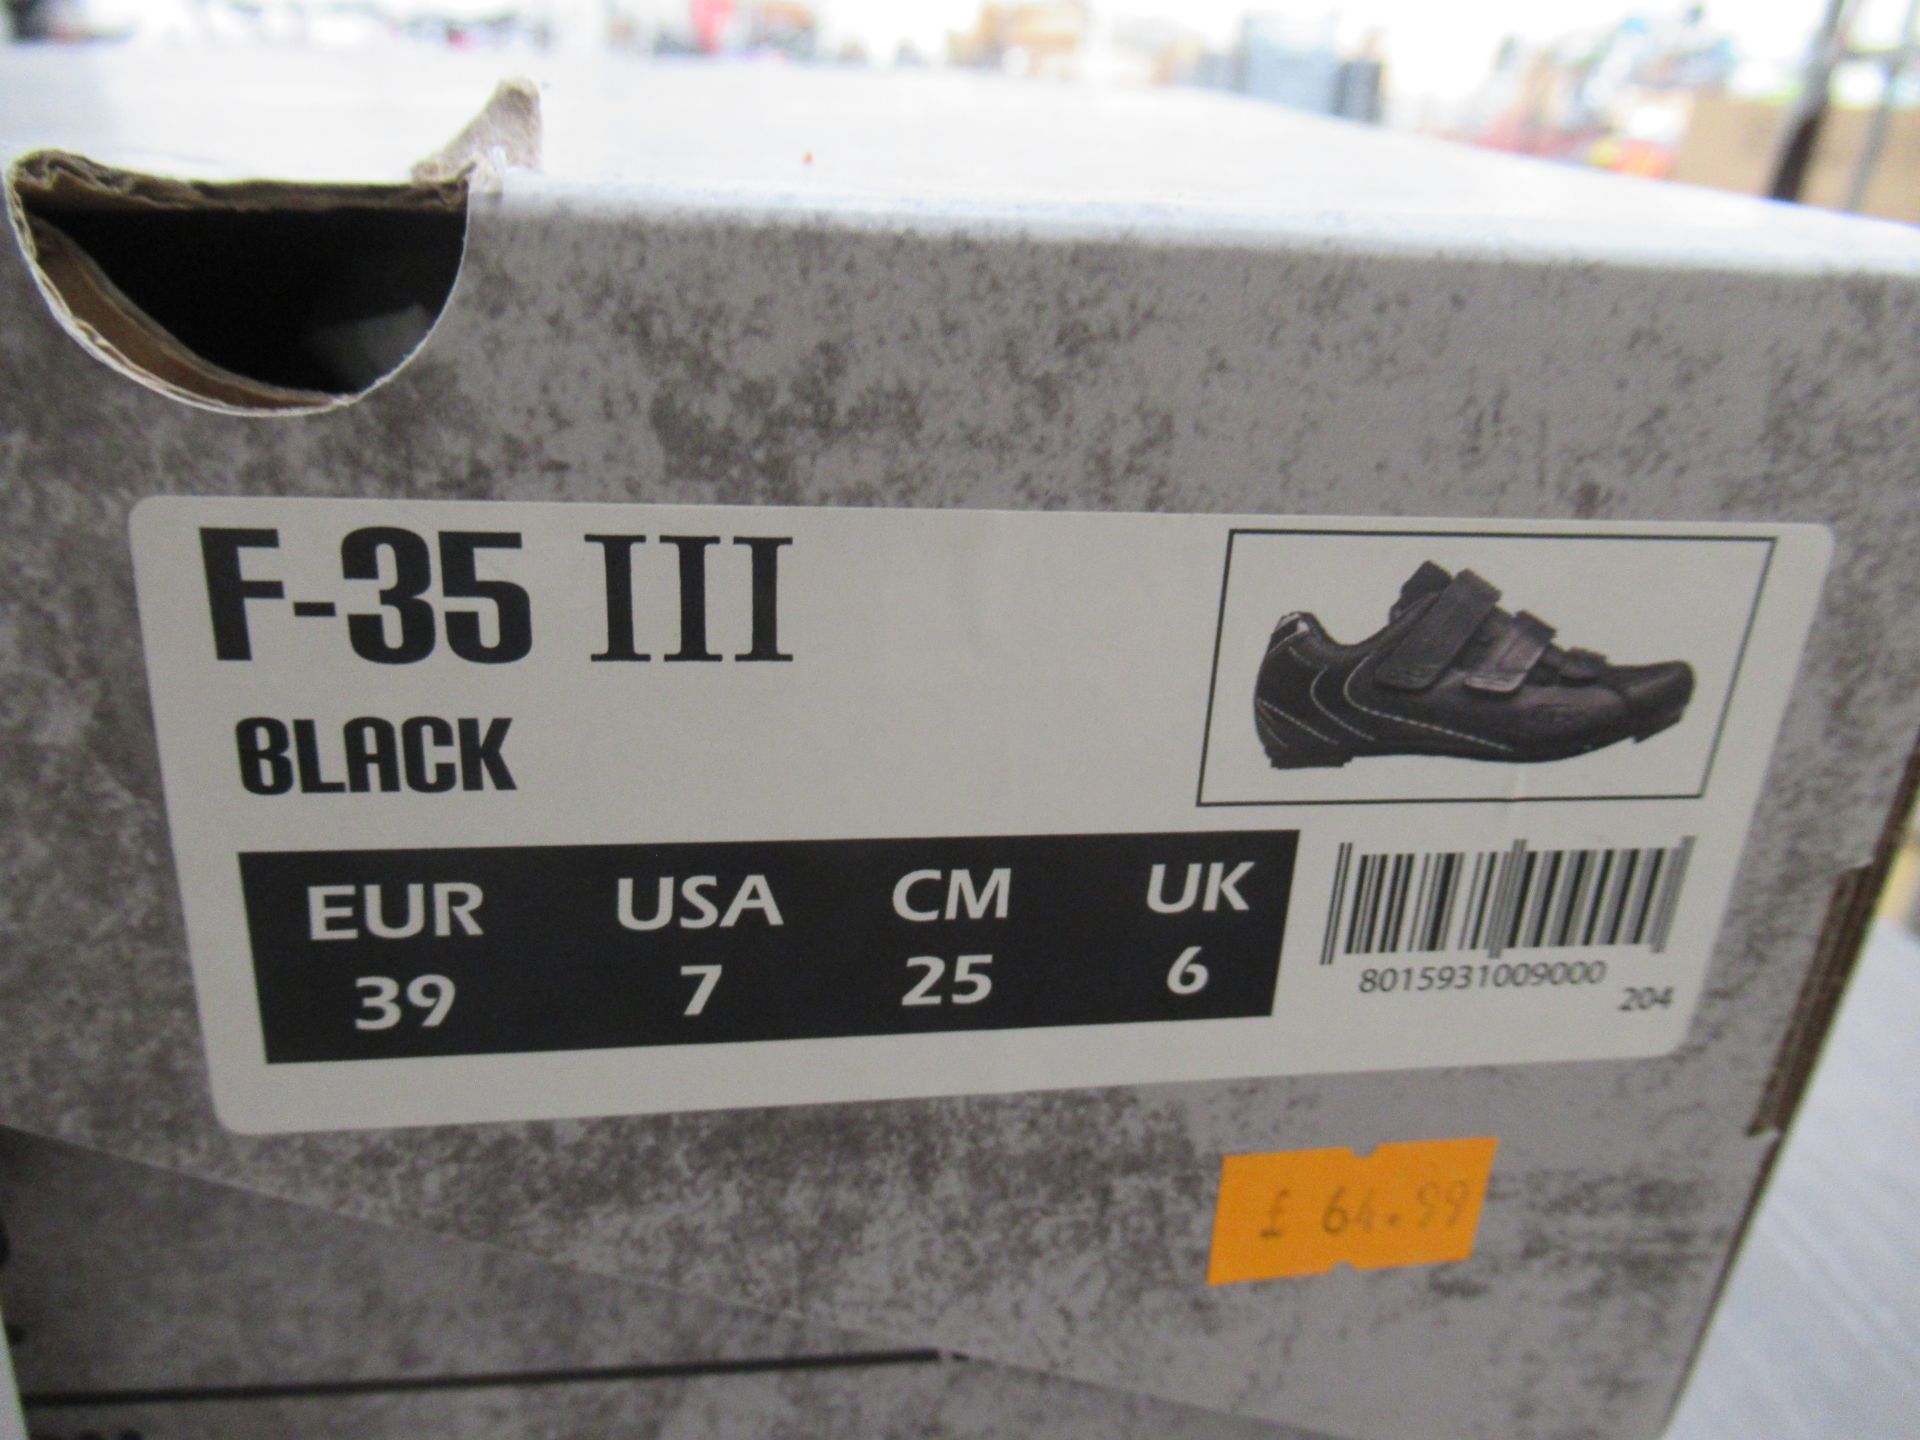 2 x Pairs of FLR cycling shoes - 1 x F-11 boxed EU size 39 (RRP£99.99) and 1 x F-35 III boxed EU siz - Image 2 of 7